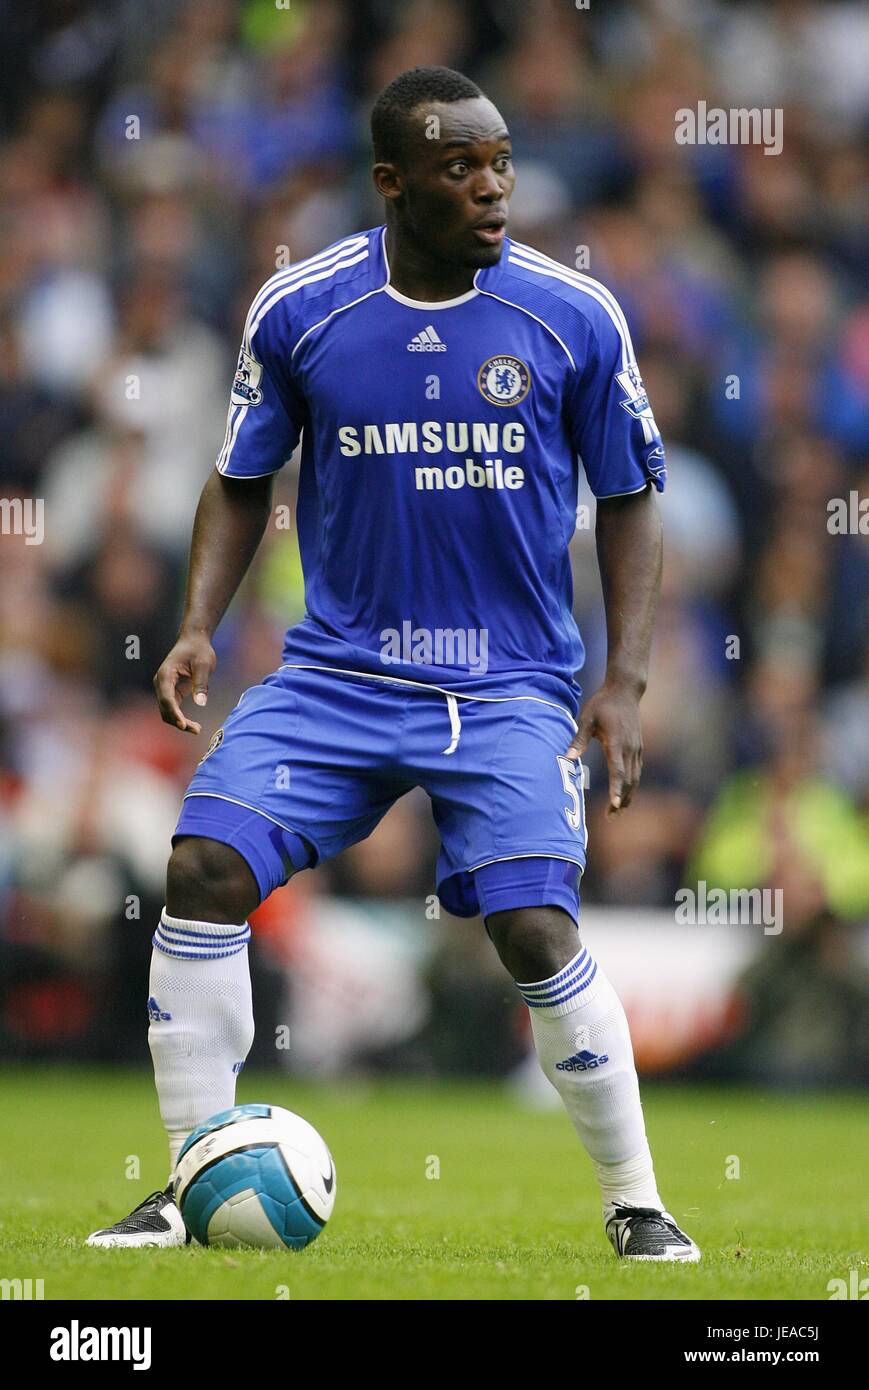 MICHAEL ESSIEN CHELSEA FC ANFIELD LIVERPOOL ENGLAND 19 August 2007 Stock Photo